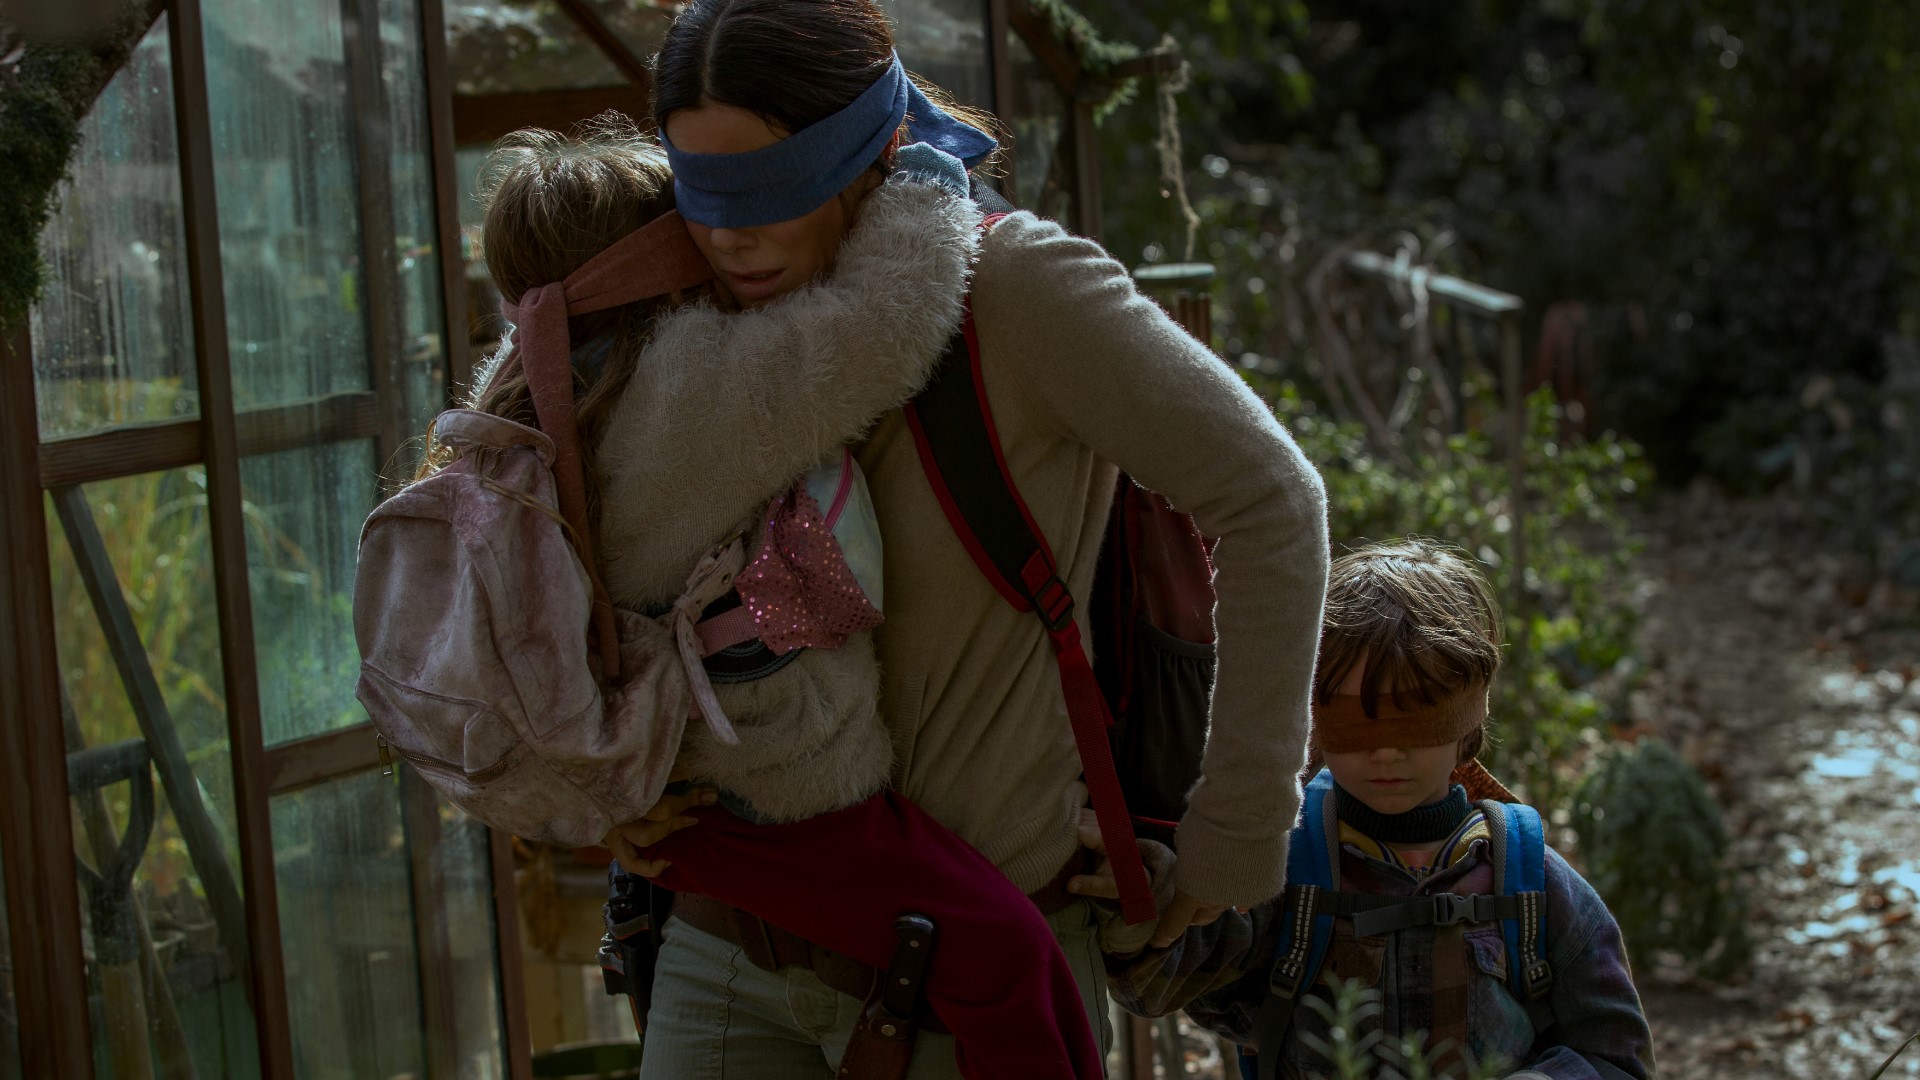 As the movie 'Bird Box' breaks streaming records, the film is yet another example of Northern California playing a big role in a big movie. Mark S. Allen tells us about the film's connection to Sacramento and Stockton.